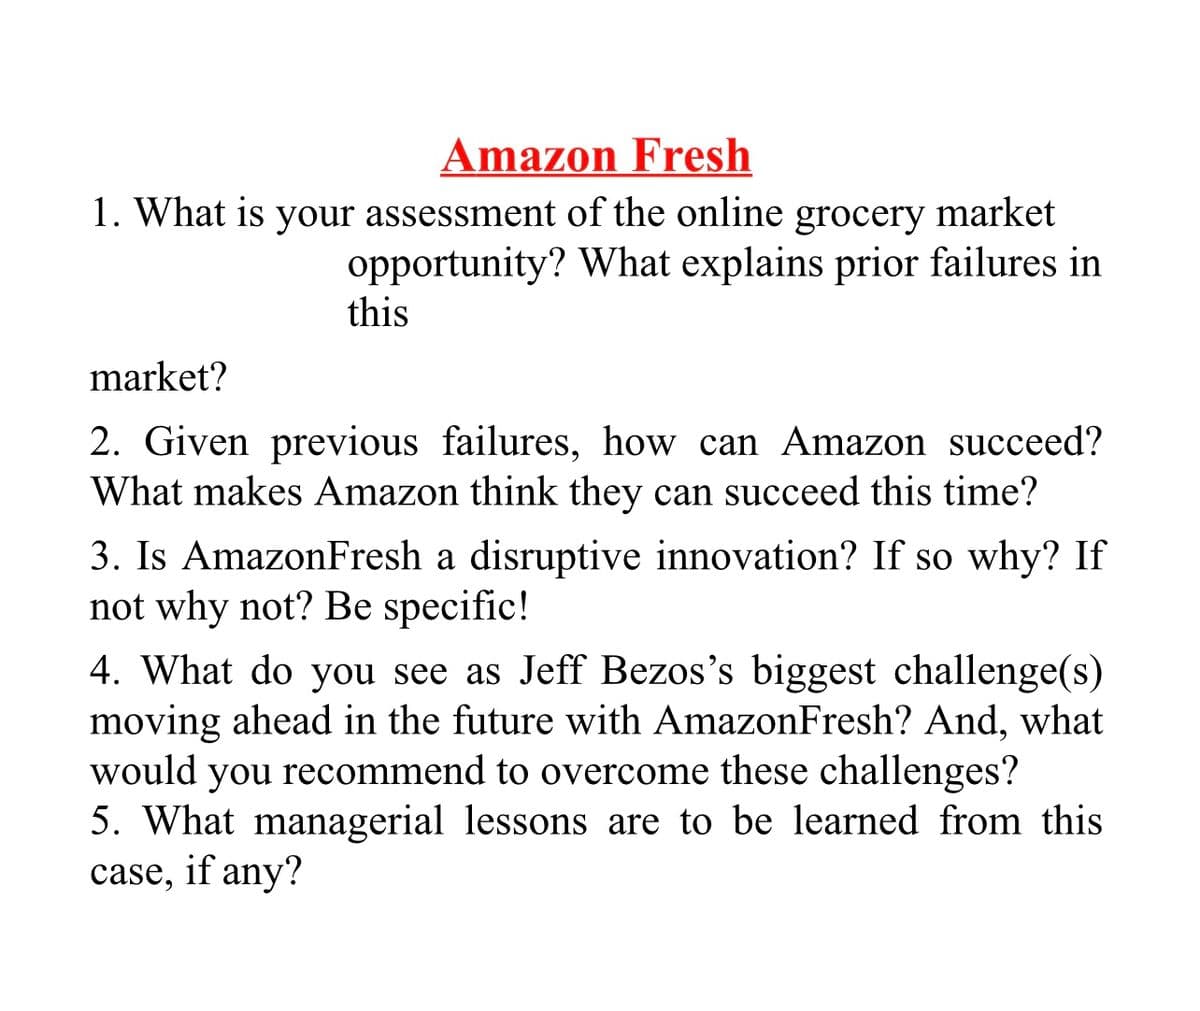 Amazon Fresh
1. What is your assessment of the online grocery market
opportunity? What explains prior failures in
this
market?
2. Given previous failures, how can Amazon succeed?
What makes Amazon think they can succeed this time?
3. Is AmazonFresh a disruptive innovation? If so why? If
not why not? Be specific!
4. What do you see as Jeff Bezos's biggest challenge(s)
moving ahead in the future with AmazonFresh? And, what
would you recommend to overcome these challenges?
5. What managerial lessons are to be learned from this
case, if any?